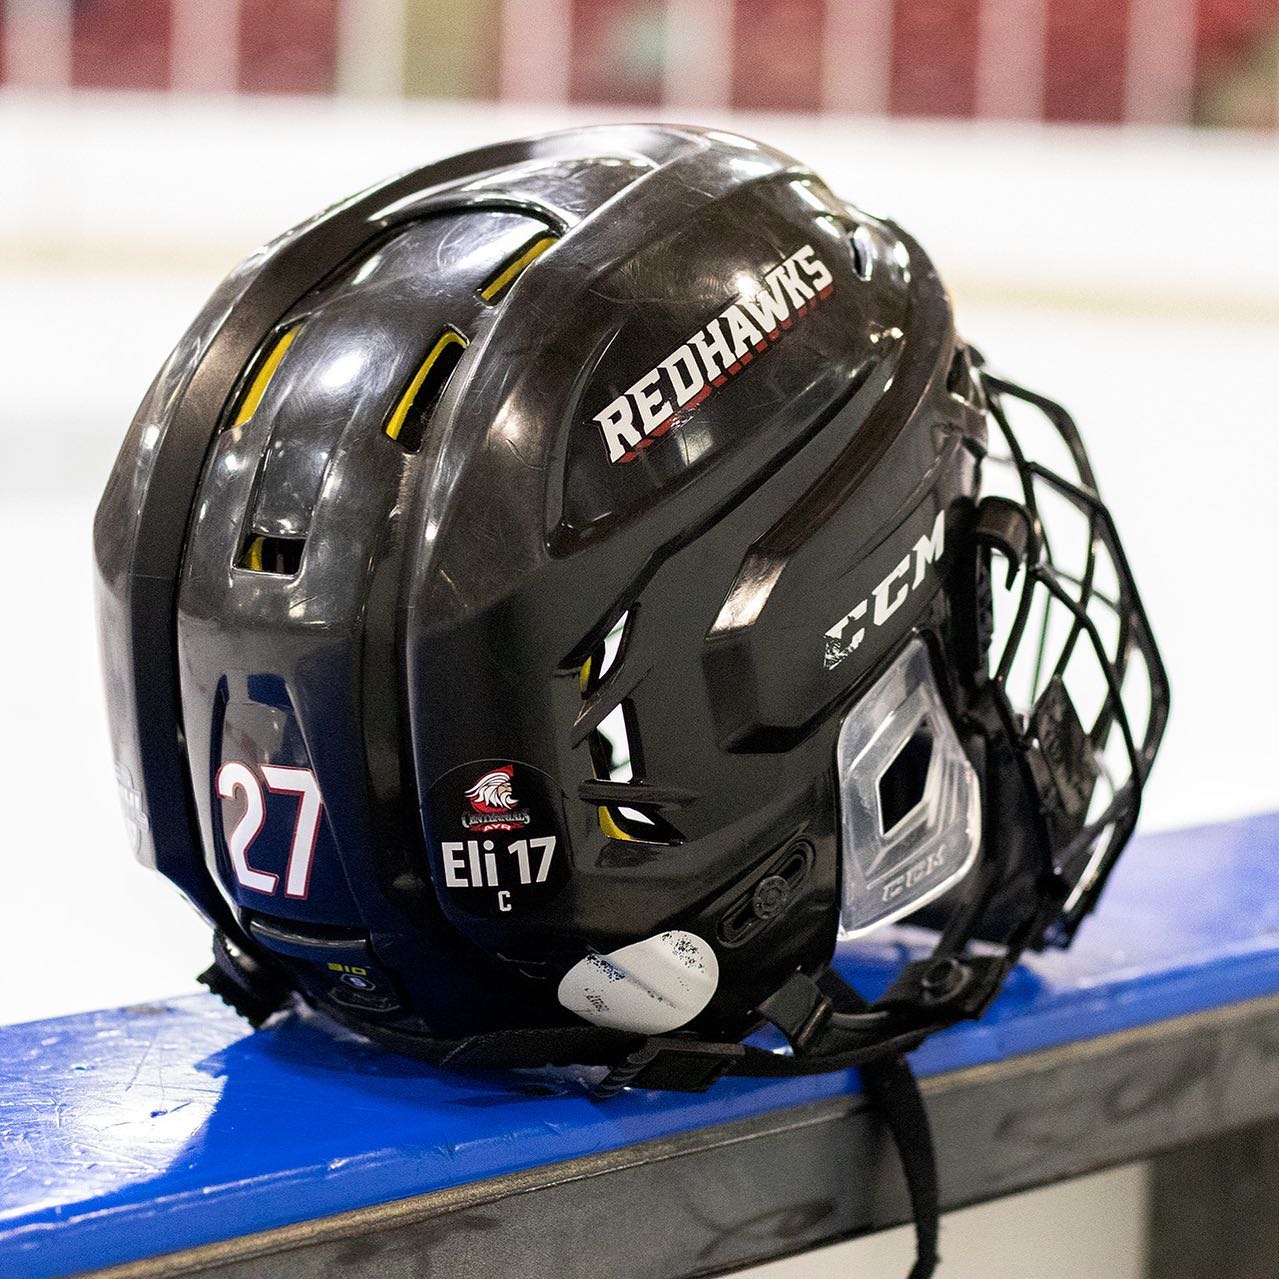 Hockey isn’t just a sport, hockey is a community that brings everyone together regardless of standings, rivalries or towns in between. Our community lost one of its members before the season could begin, so we will carry Eli Palfreymans honour and memory with us into every game. This season is for you 17. 

@ayrcentennials #RIP17